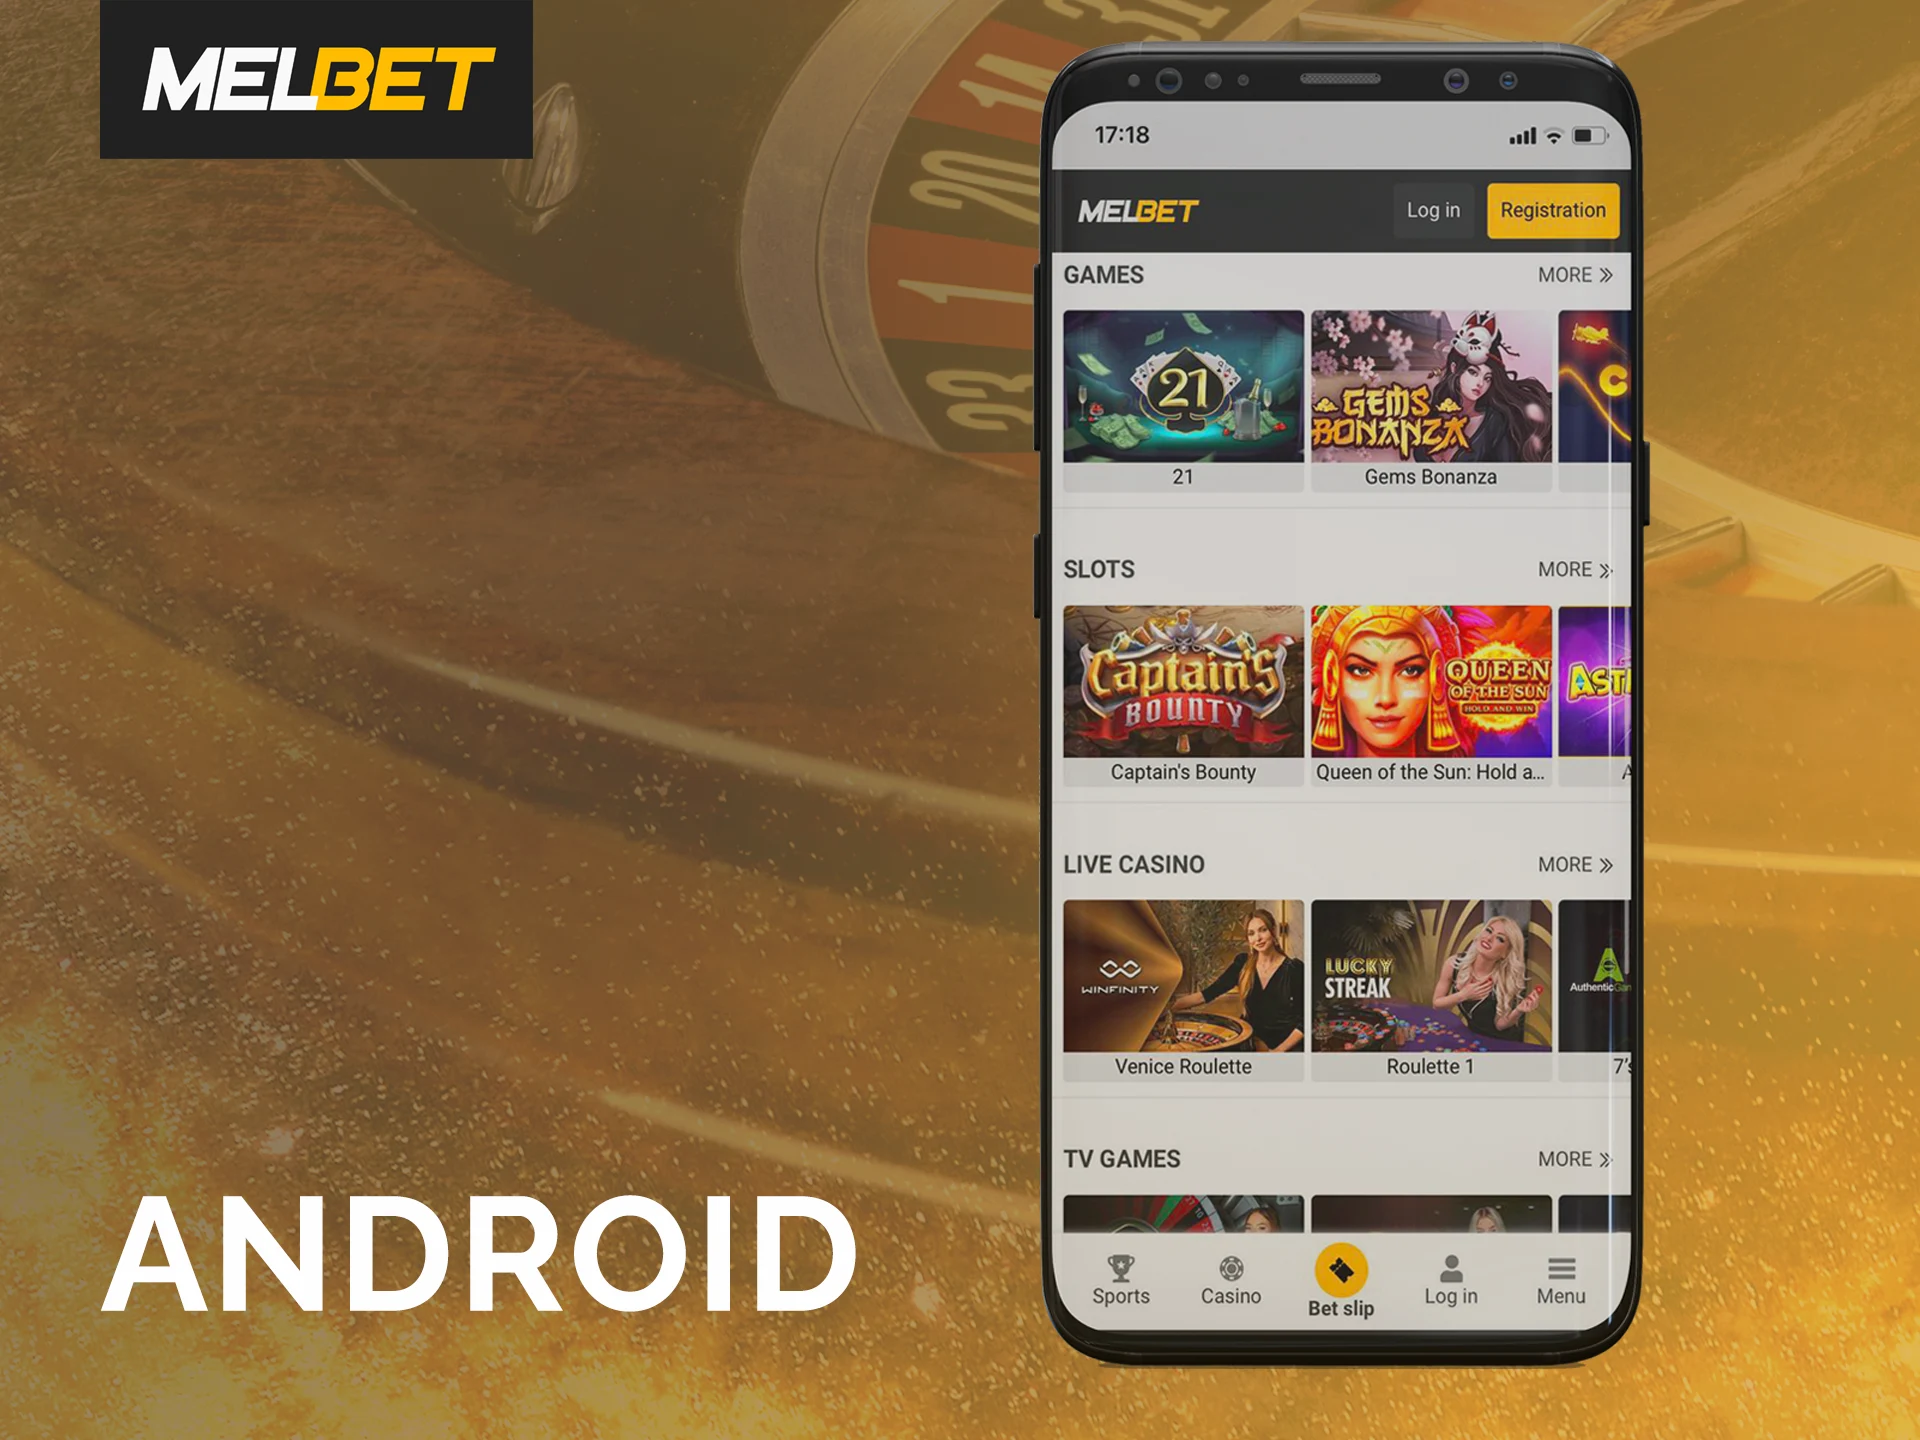 Download the Melbet mobile app for Android.